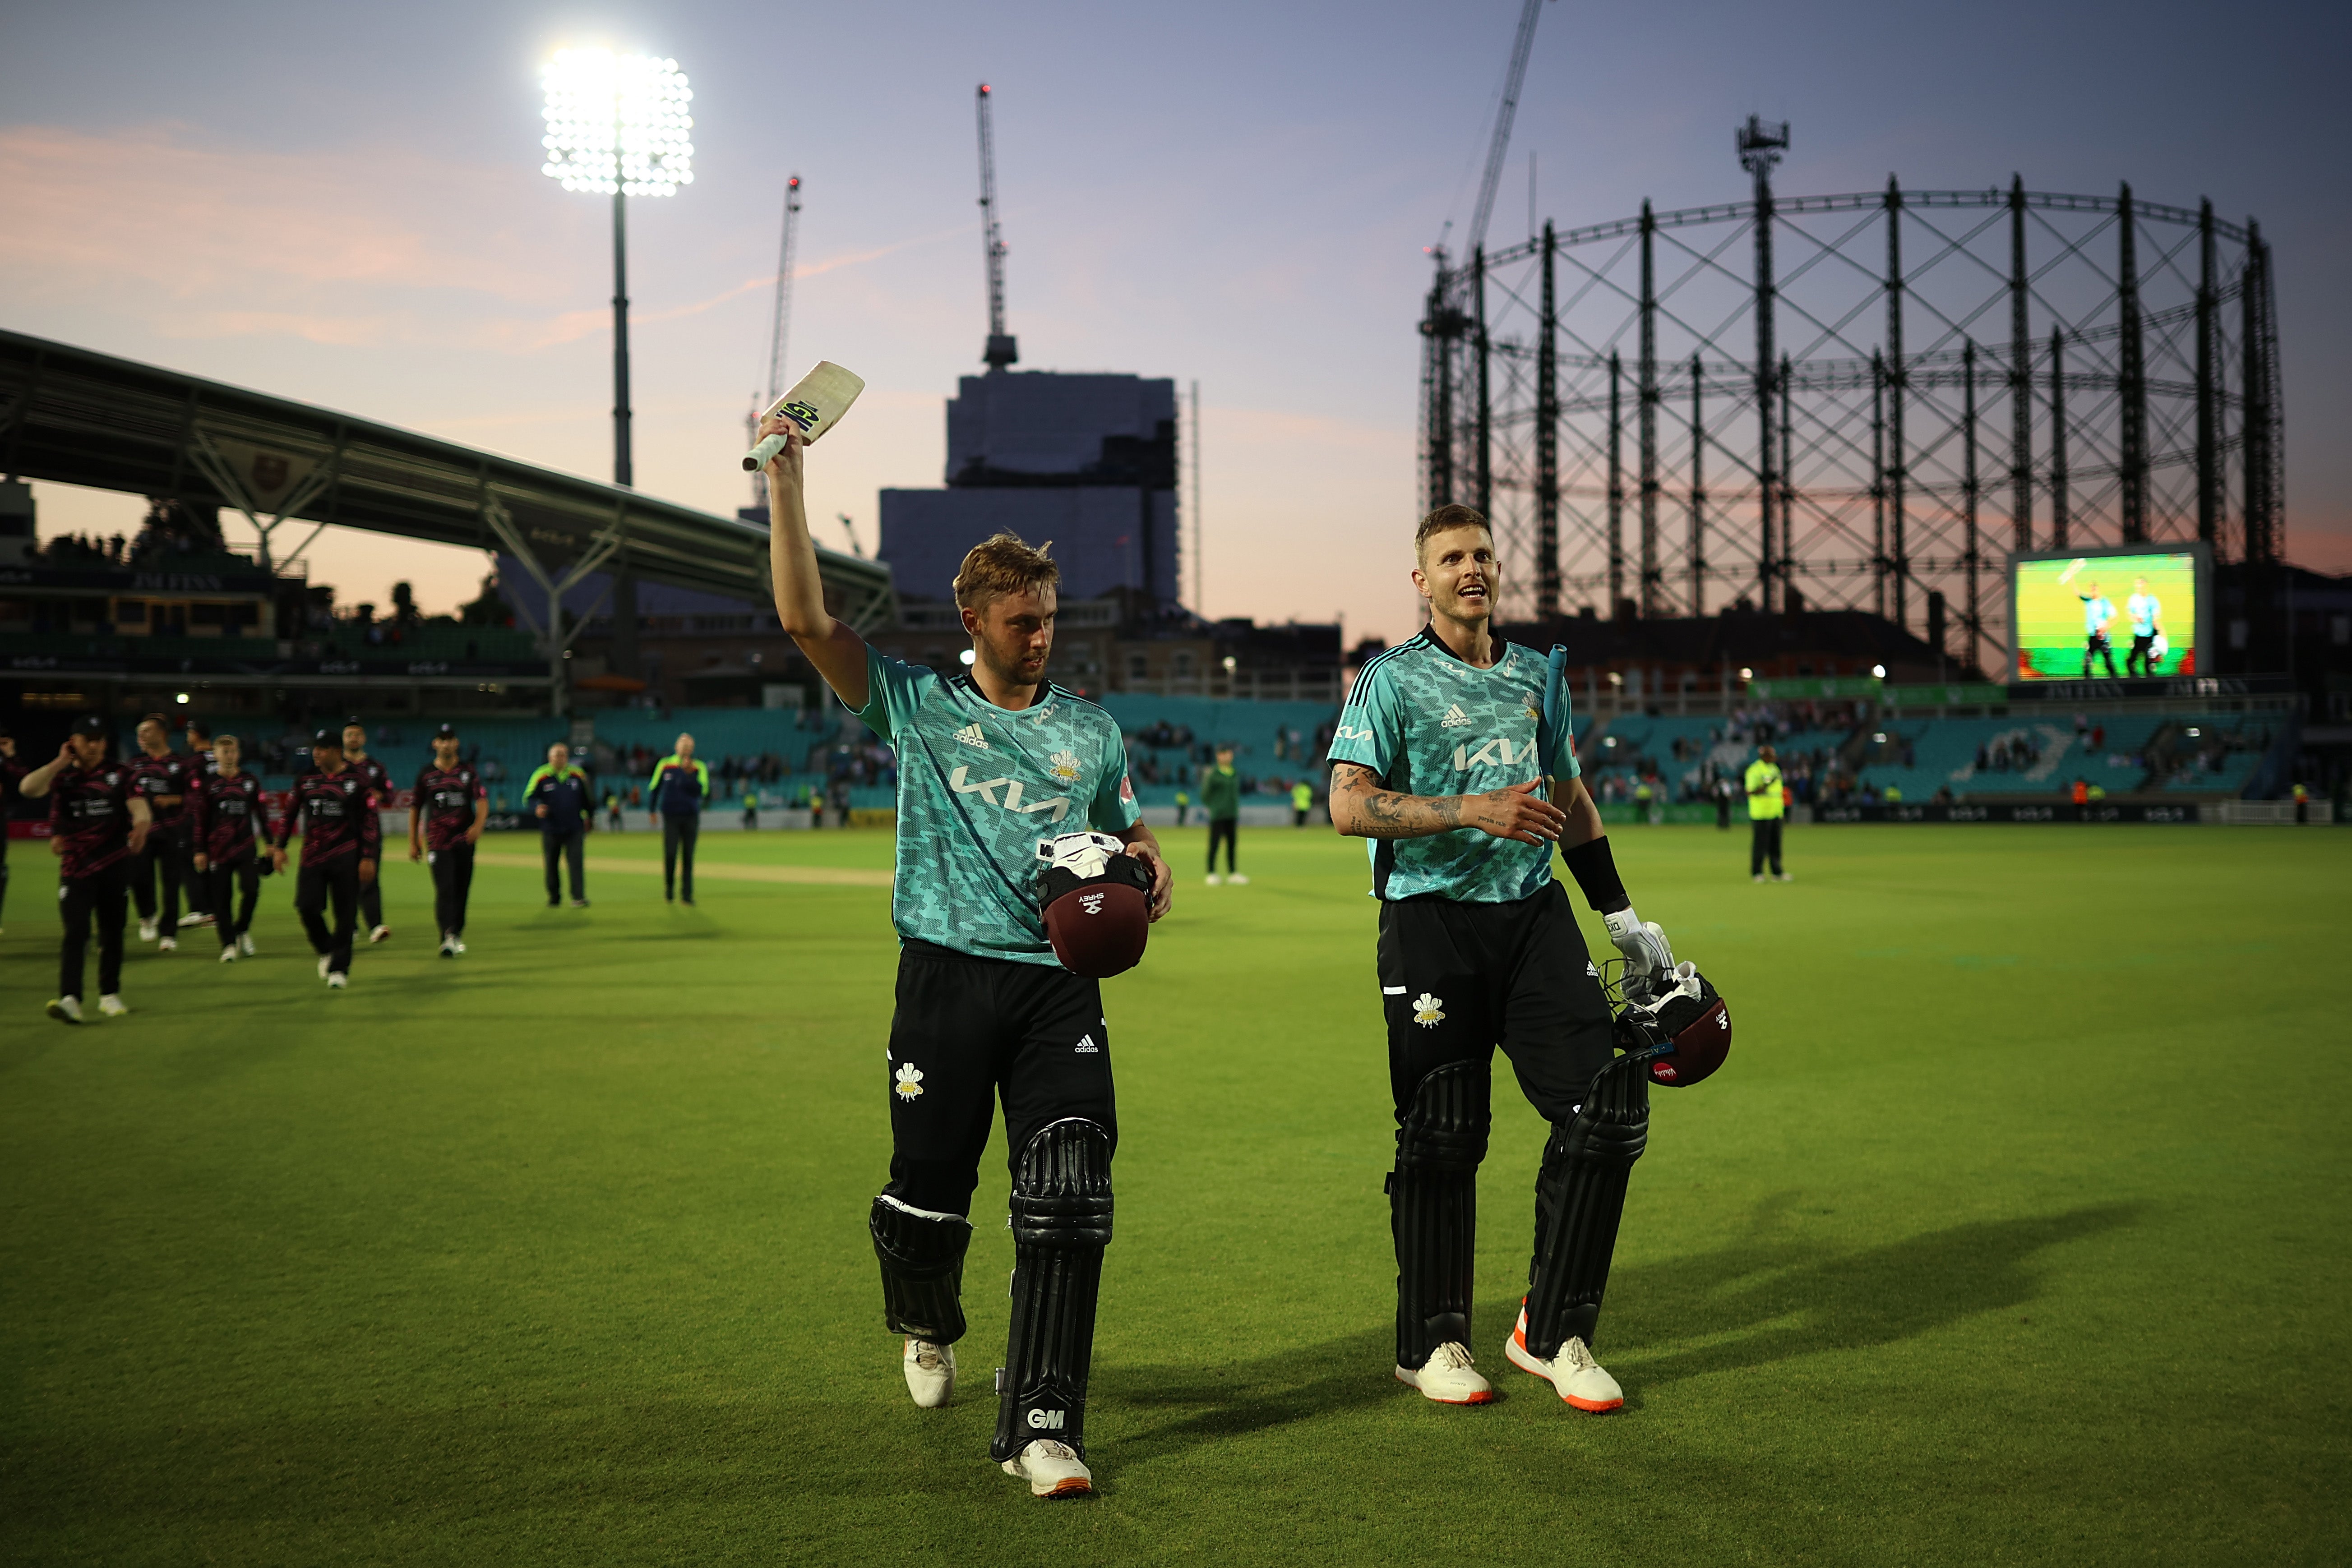 Surrey’s Conor McKerr and Will Jacks leave the field